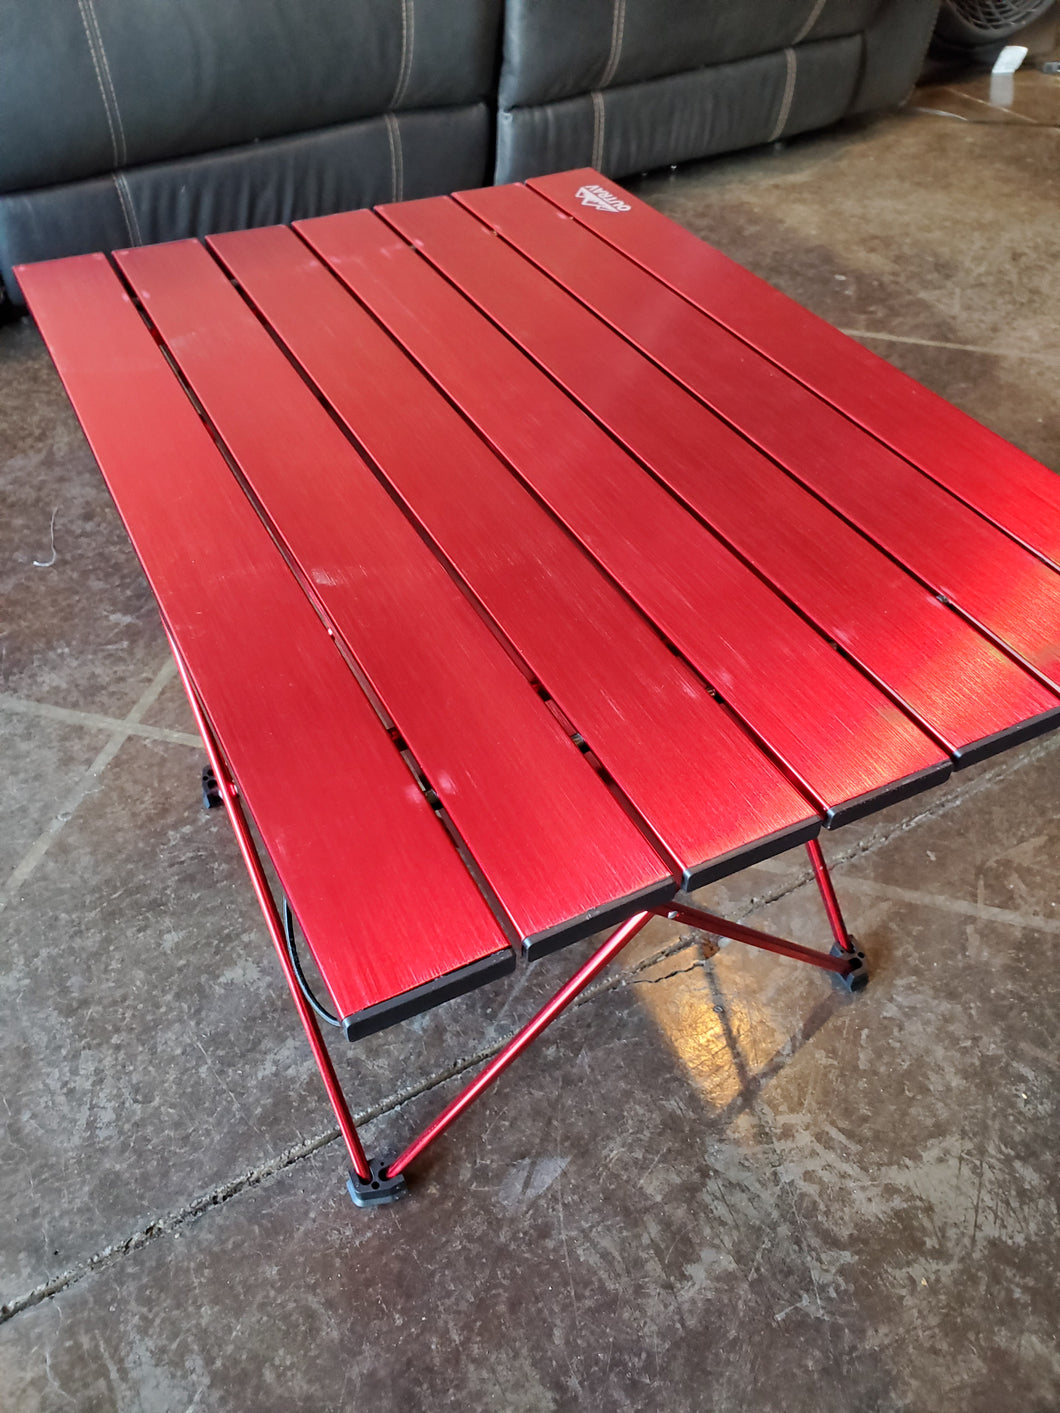 Outry Lightweight Aluminum Folding Table, Portable, (RED, Medium- Unfolded: 22.2